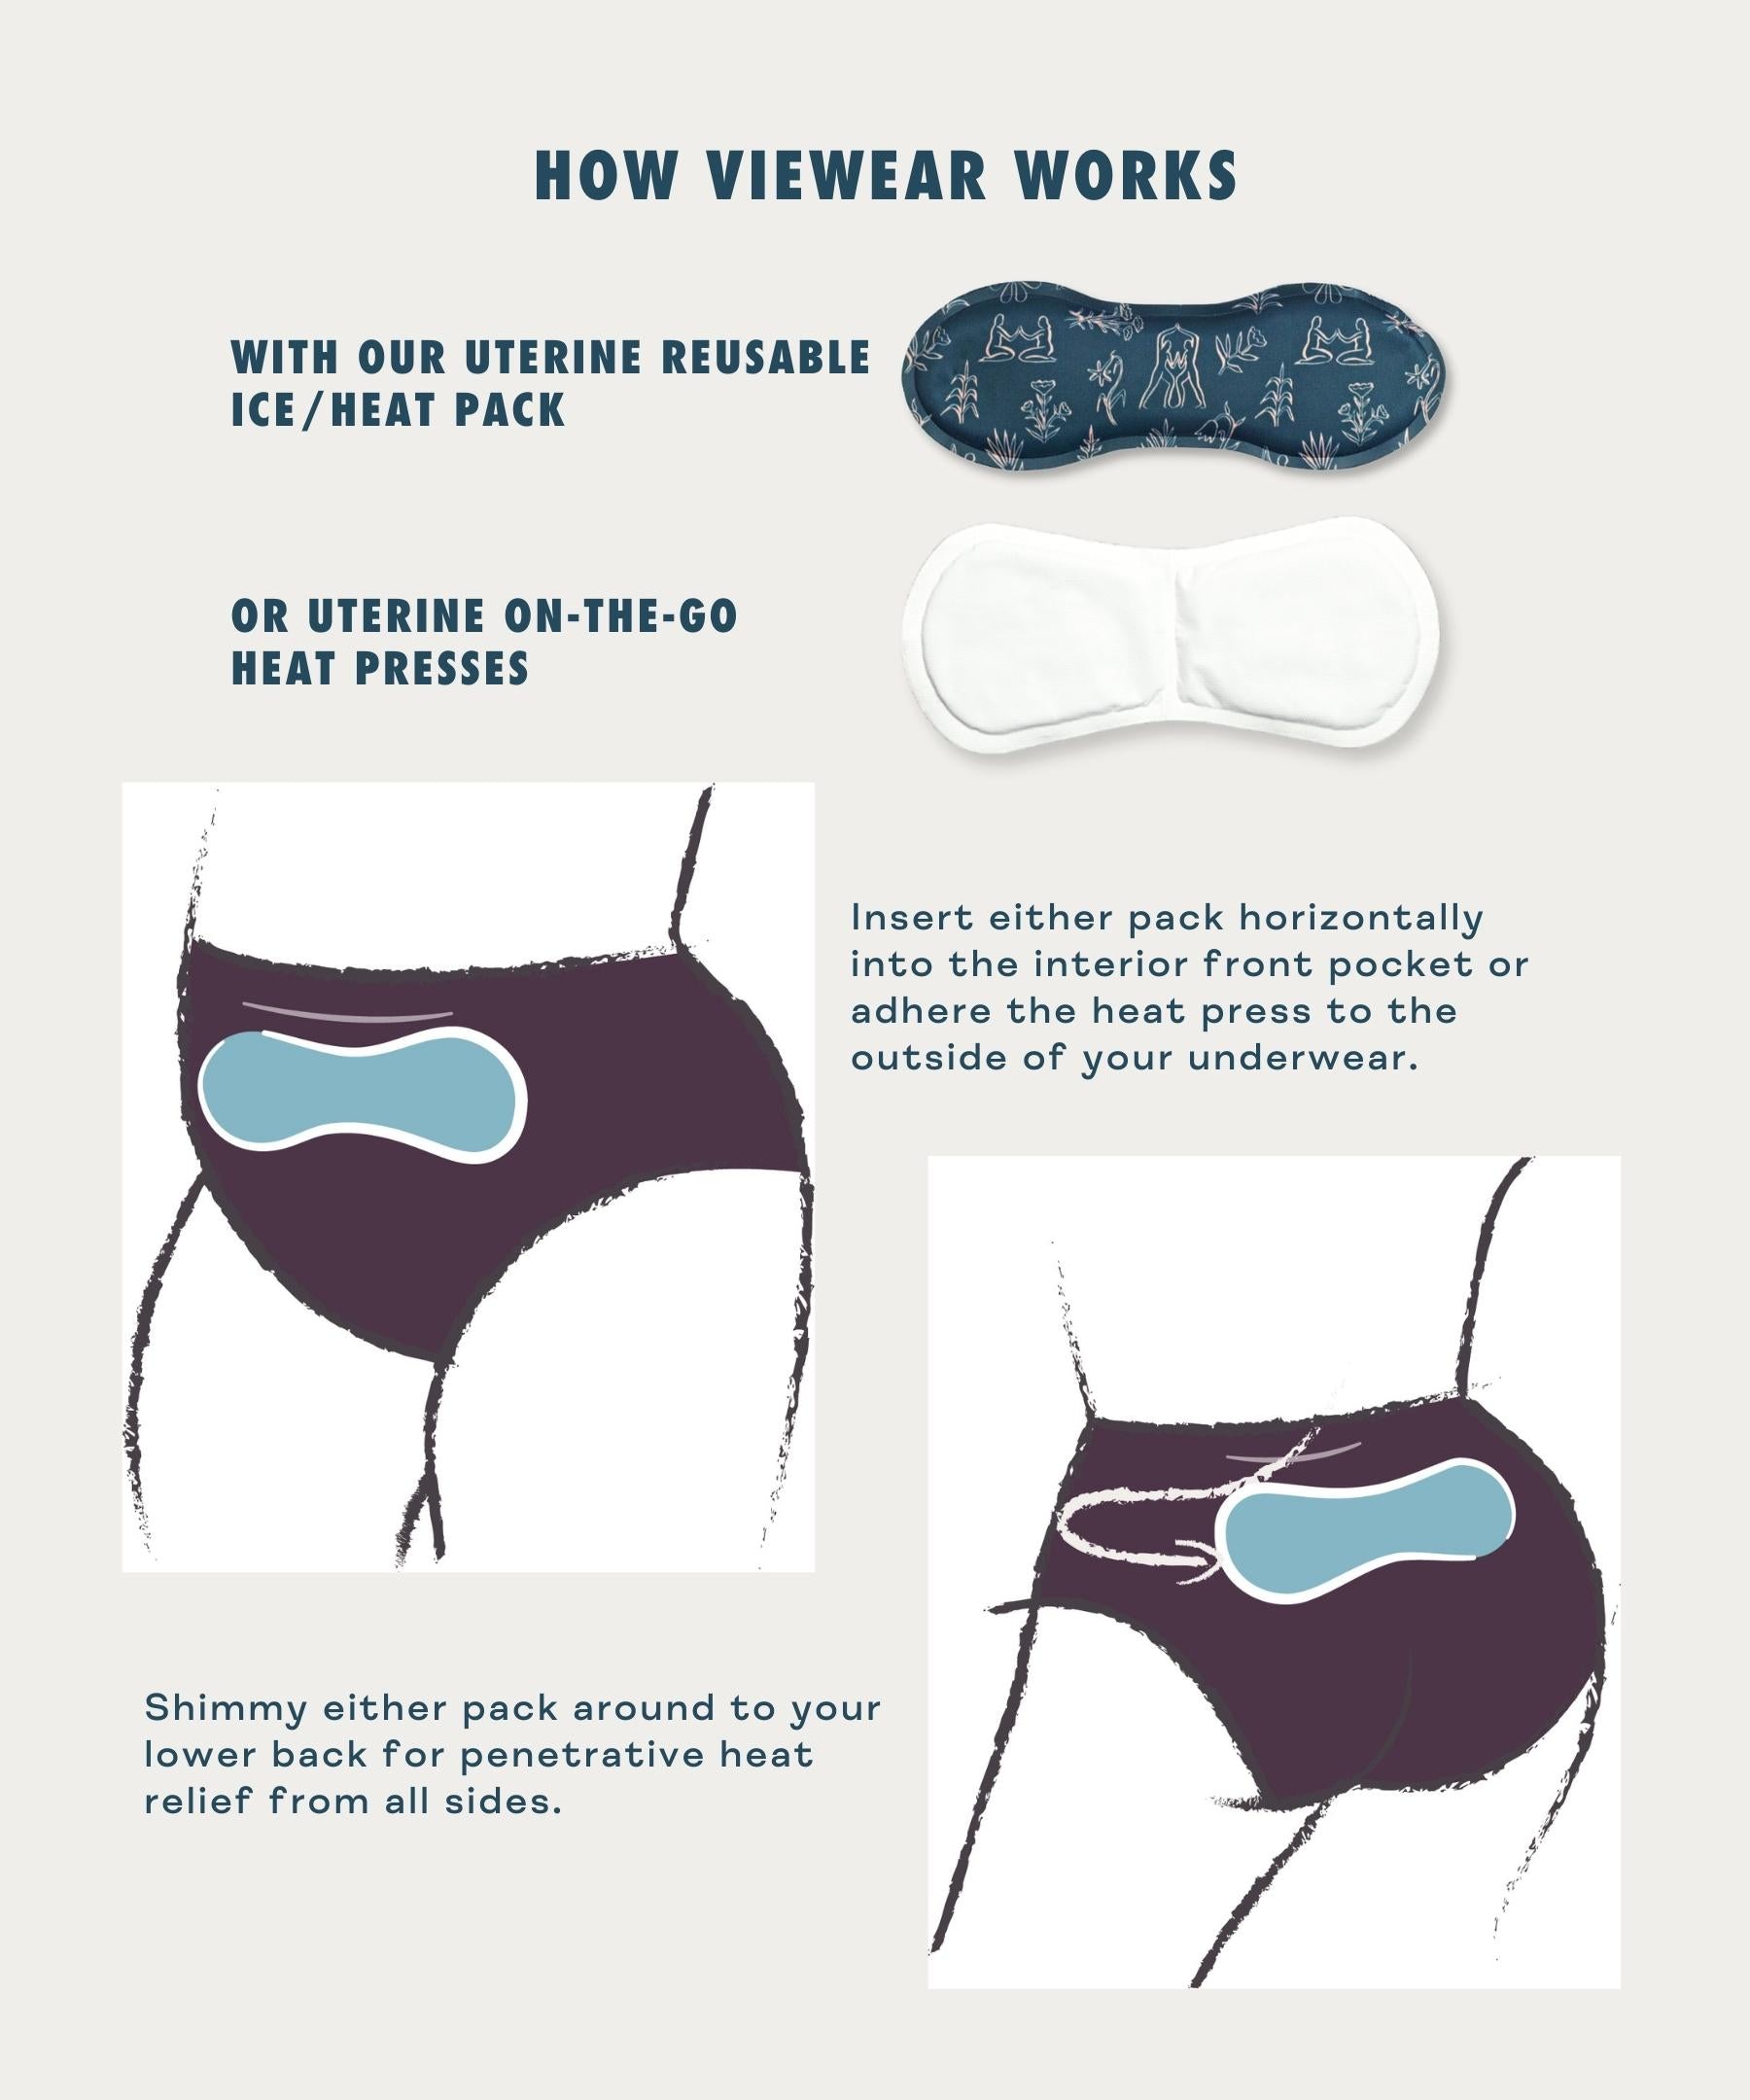 How Nyssa VieWear Works Infographic